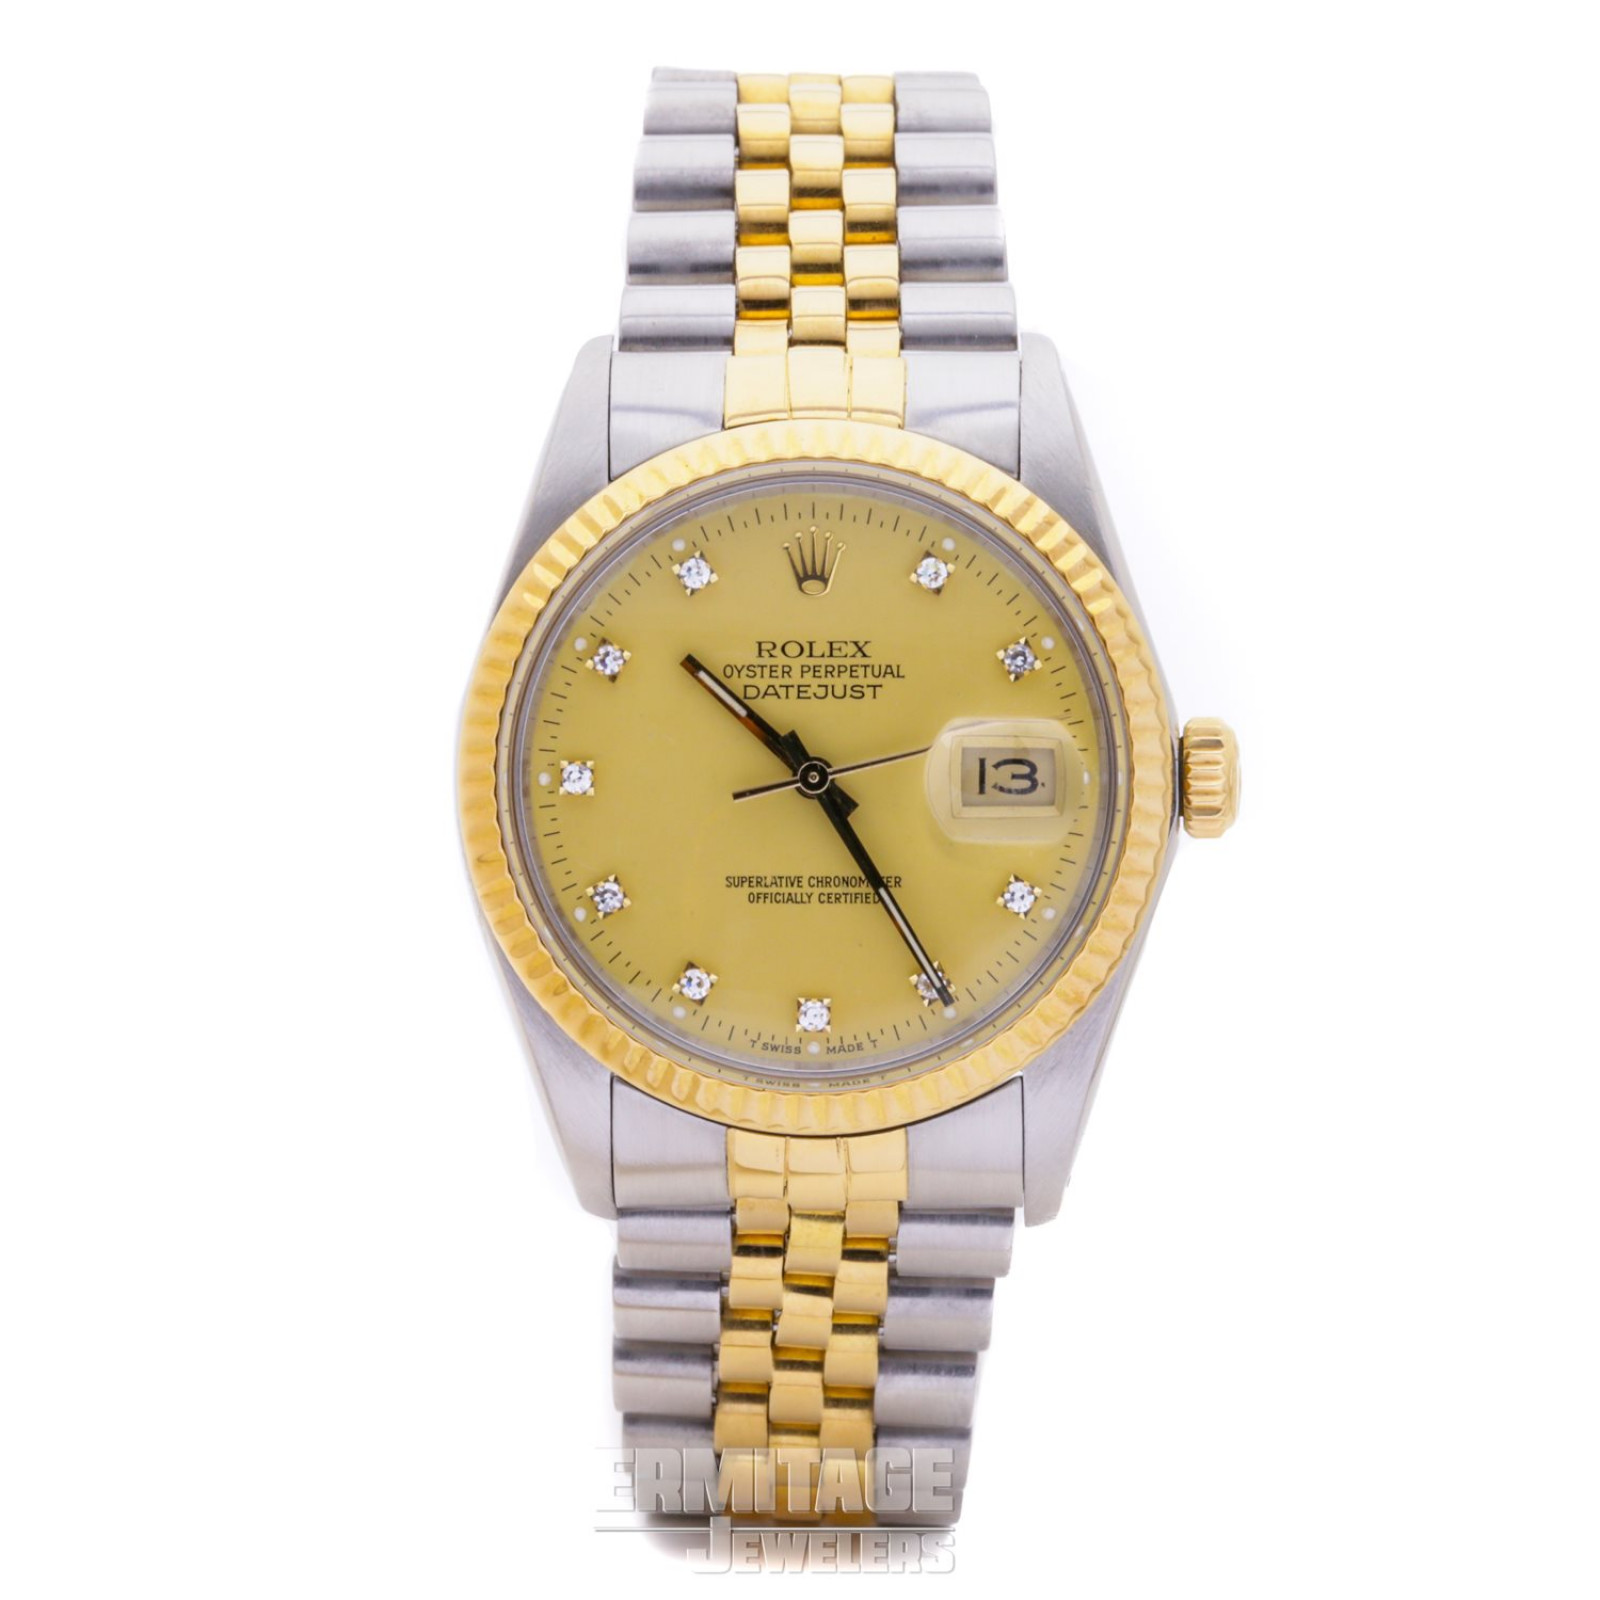 Diamond Rolex Datejust 16013 with Champagne Dial